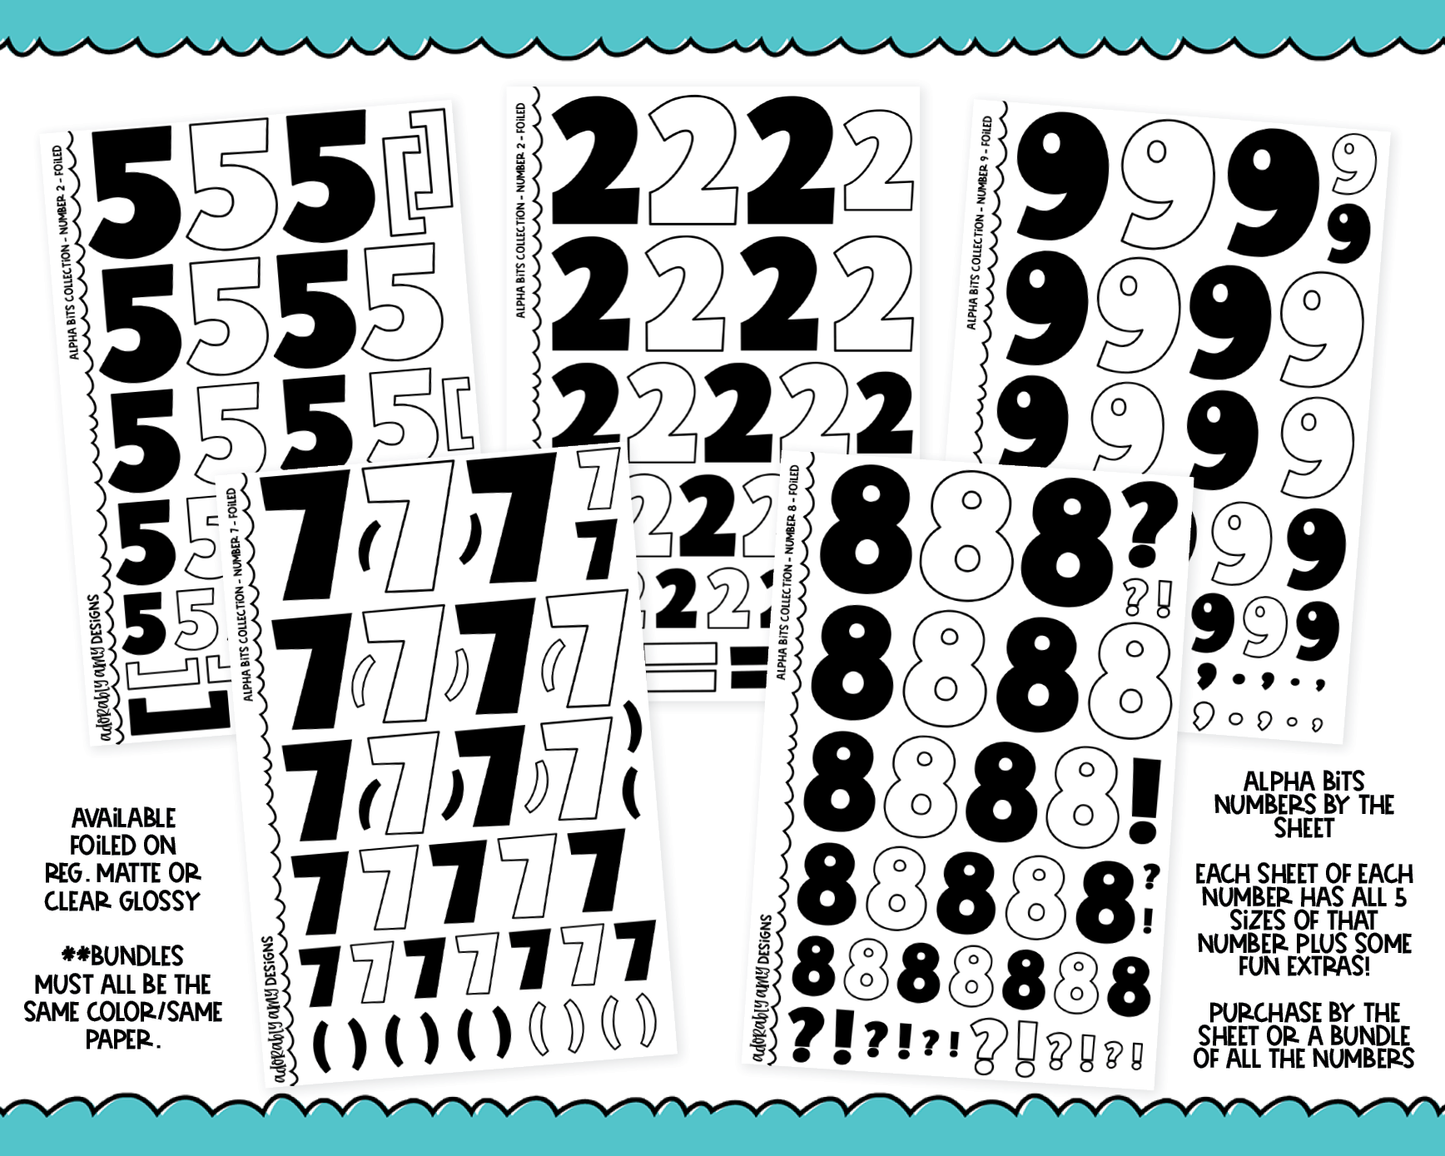 Foiled Alpha Bits V1 Number Stickers Grouped by Number Typography Planner Stickers for any Planner or Insert